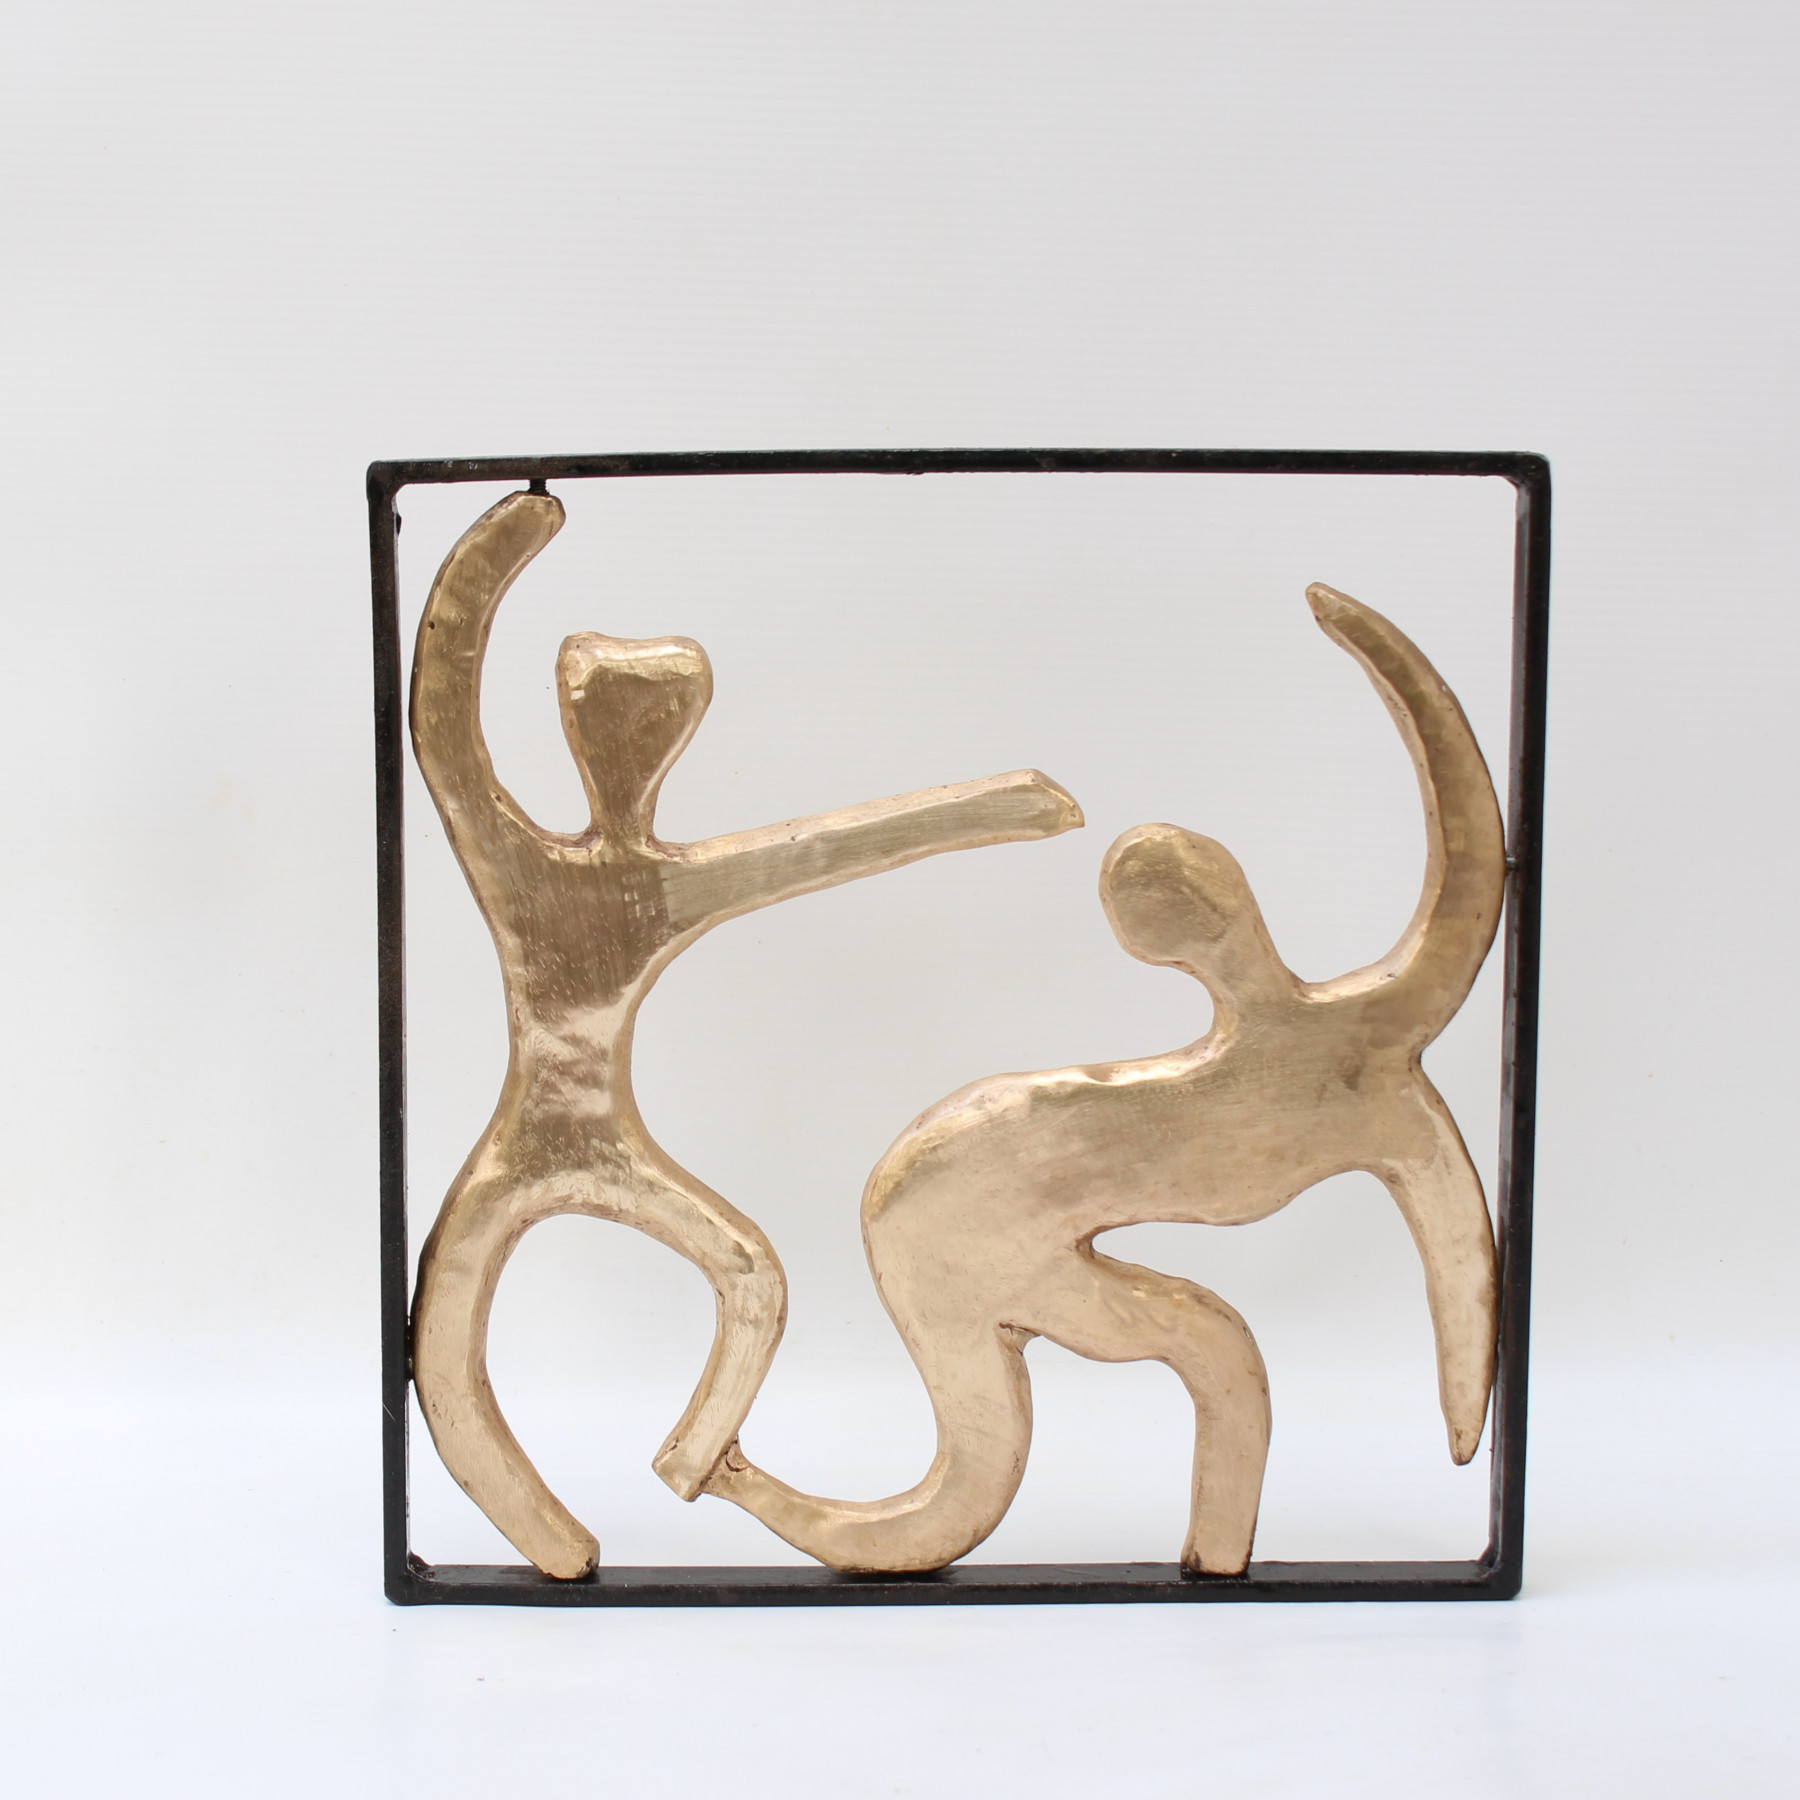 Didier Fournier, Tableau (n° 211), Sculpture - Artalistic online contemporary art buying and selling gallery